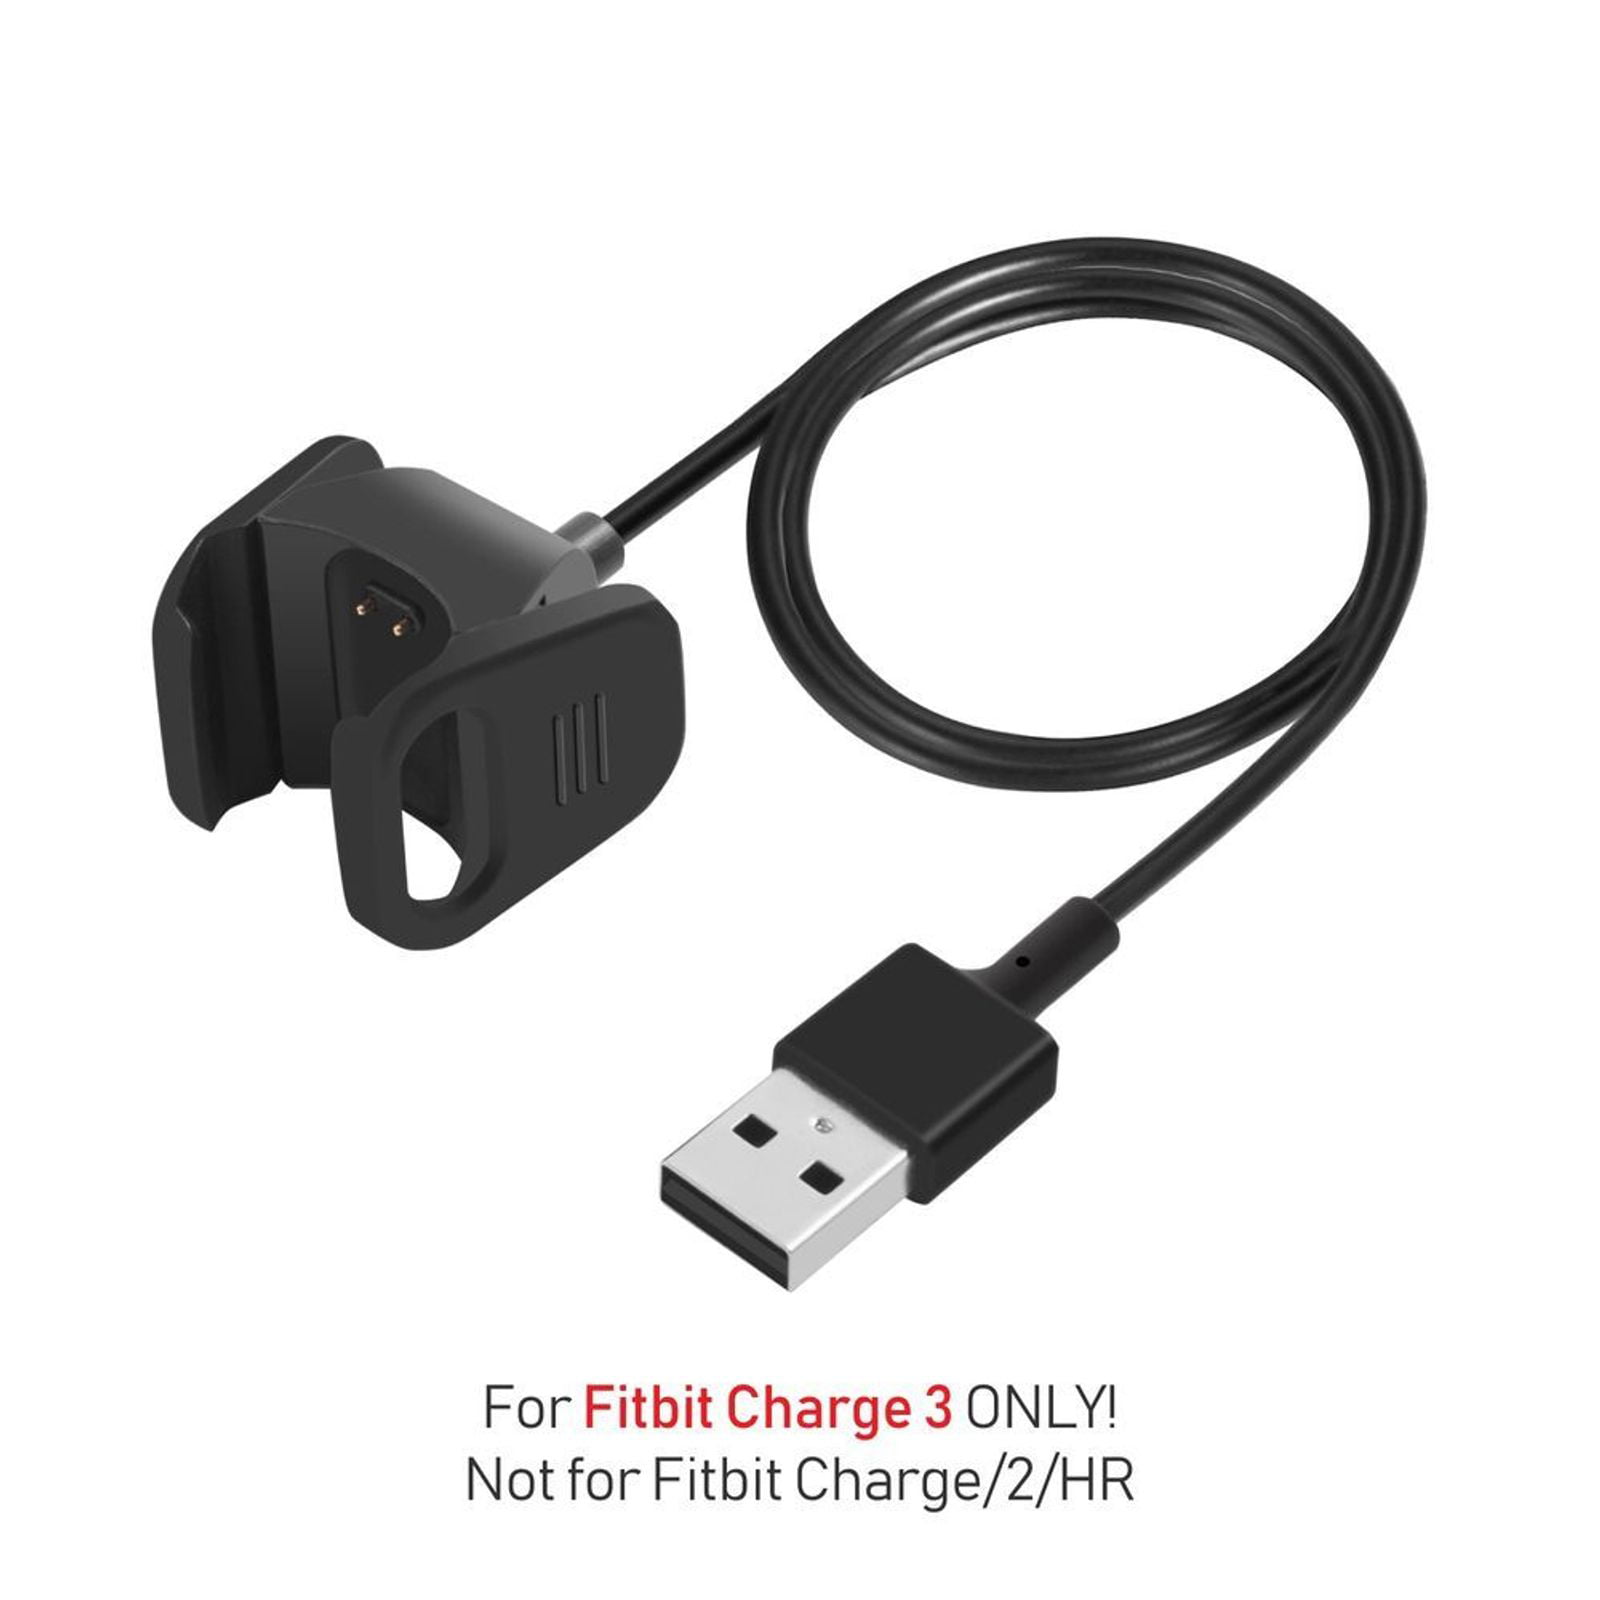 Genuine OEM Fitbit F004 USB Charging Base Adapter Cable US Seller Fast Shipping! 